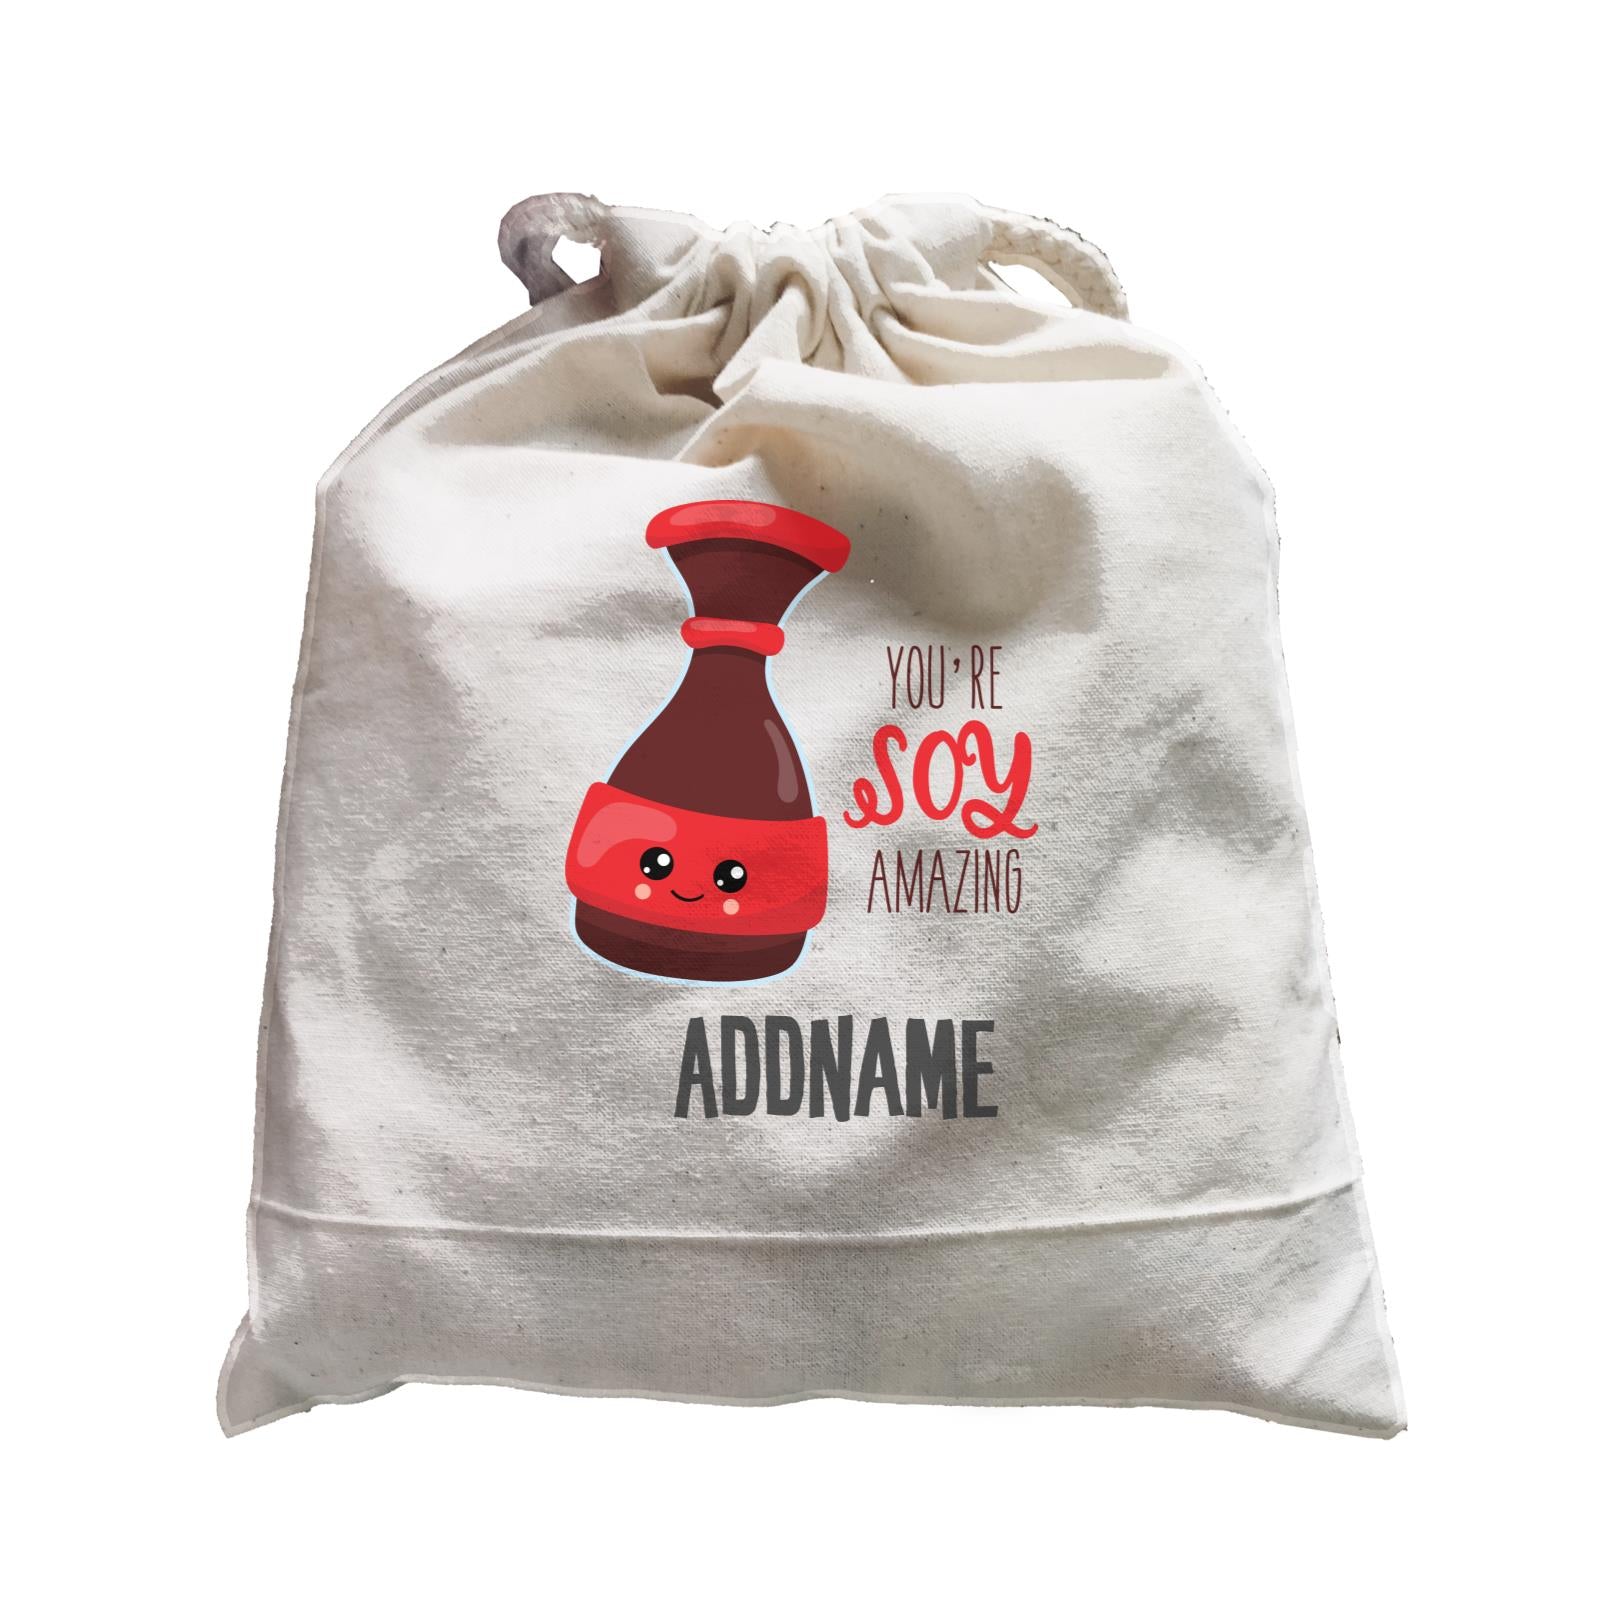 You're Soy Amazing Soy Sauce Addname Satchel